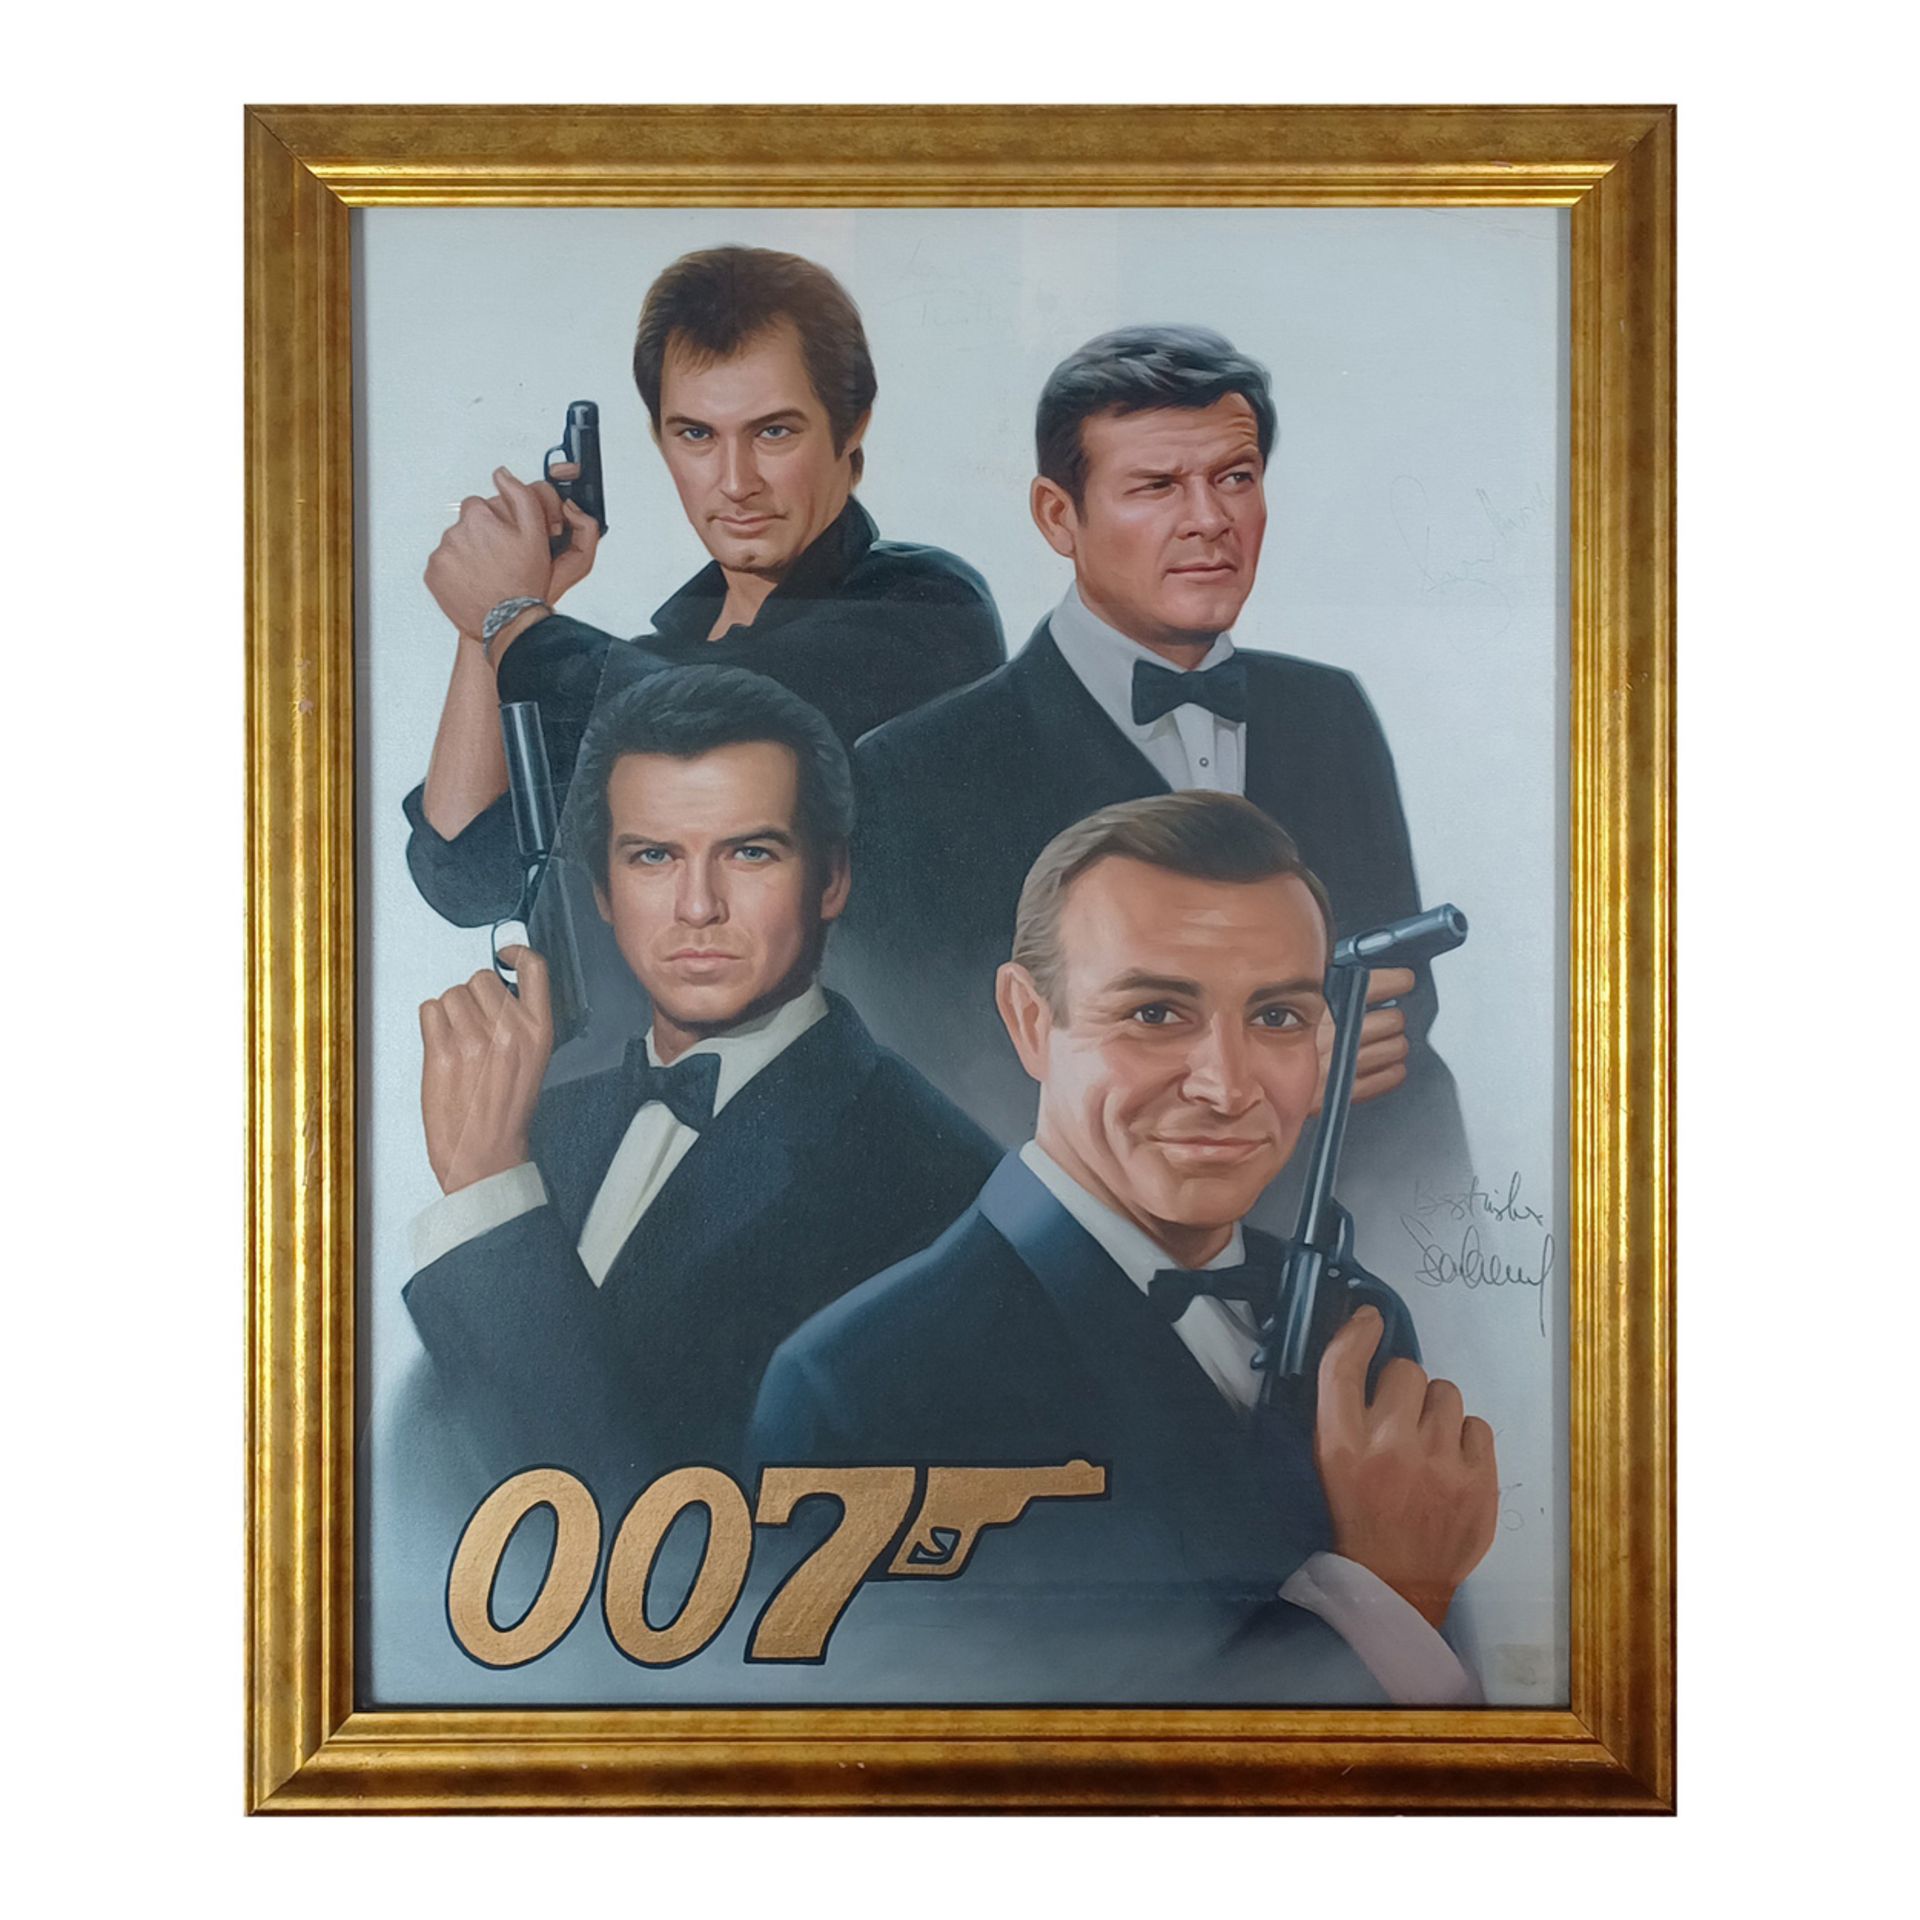 Oil Painting of 4 James Bond Actors with Signatures - Image 2 of 8